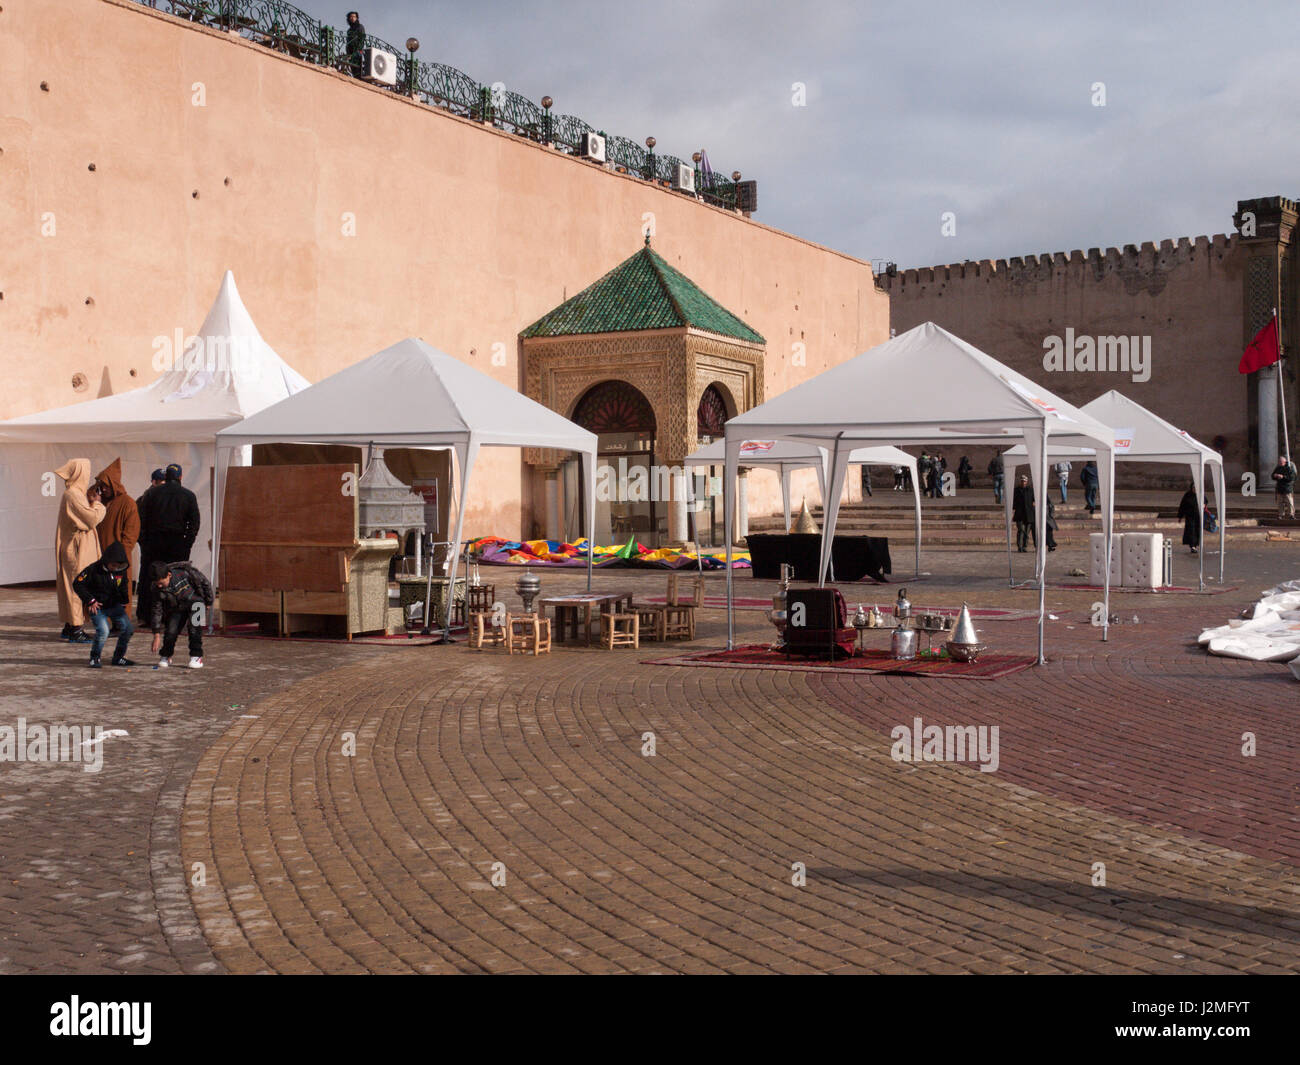 Traders in Place Lahdime in Meknes, Morocco Stock Photo